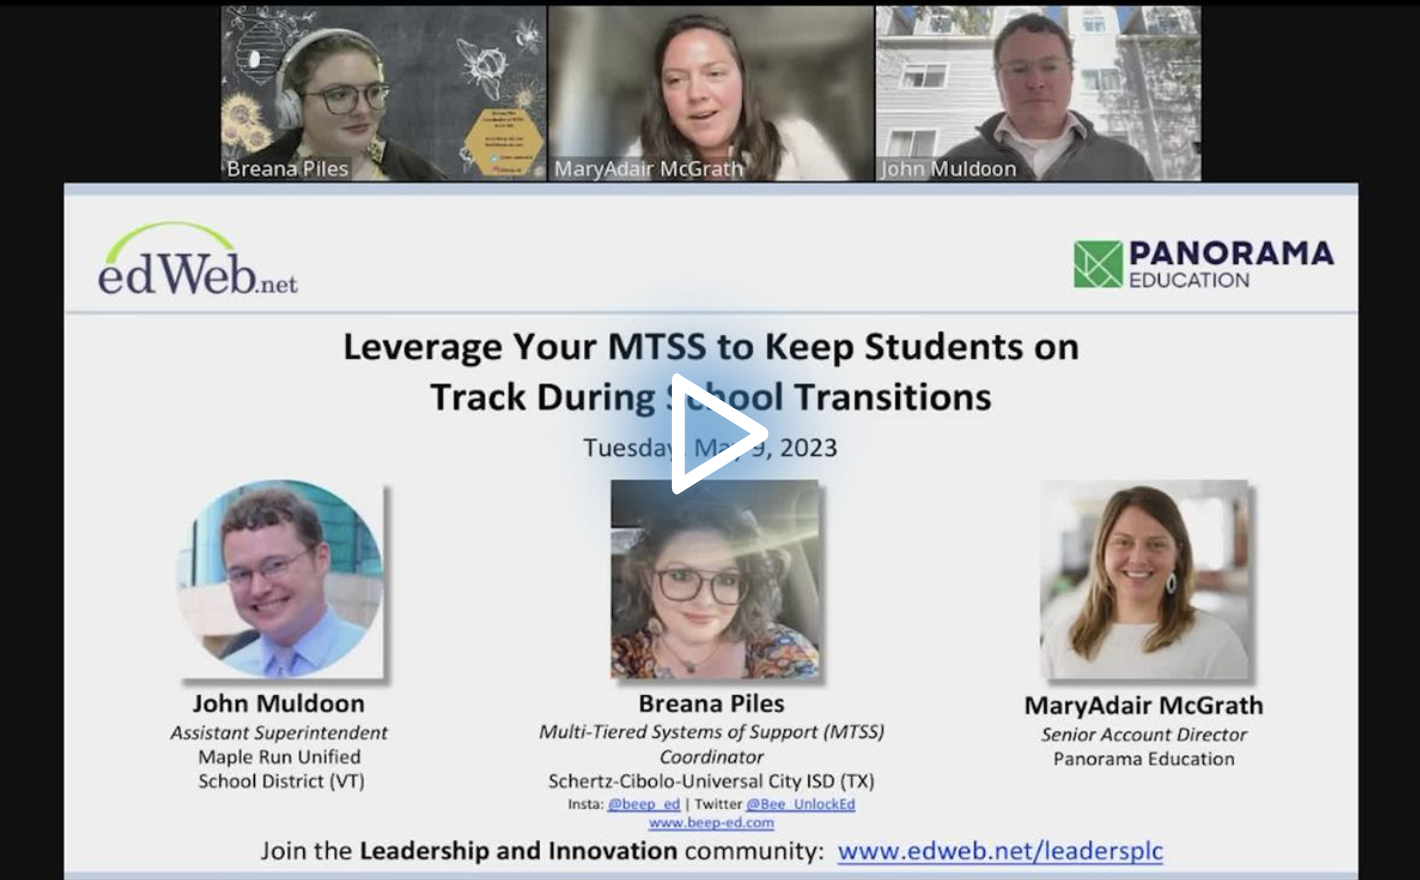 Leverage Your MTSS to Keep Students on Track During School Transitions edLeader Panel recording screenshot